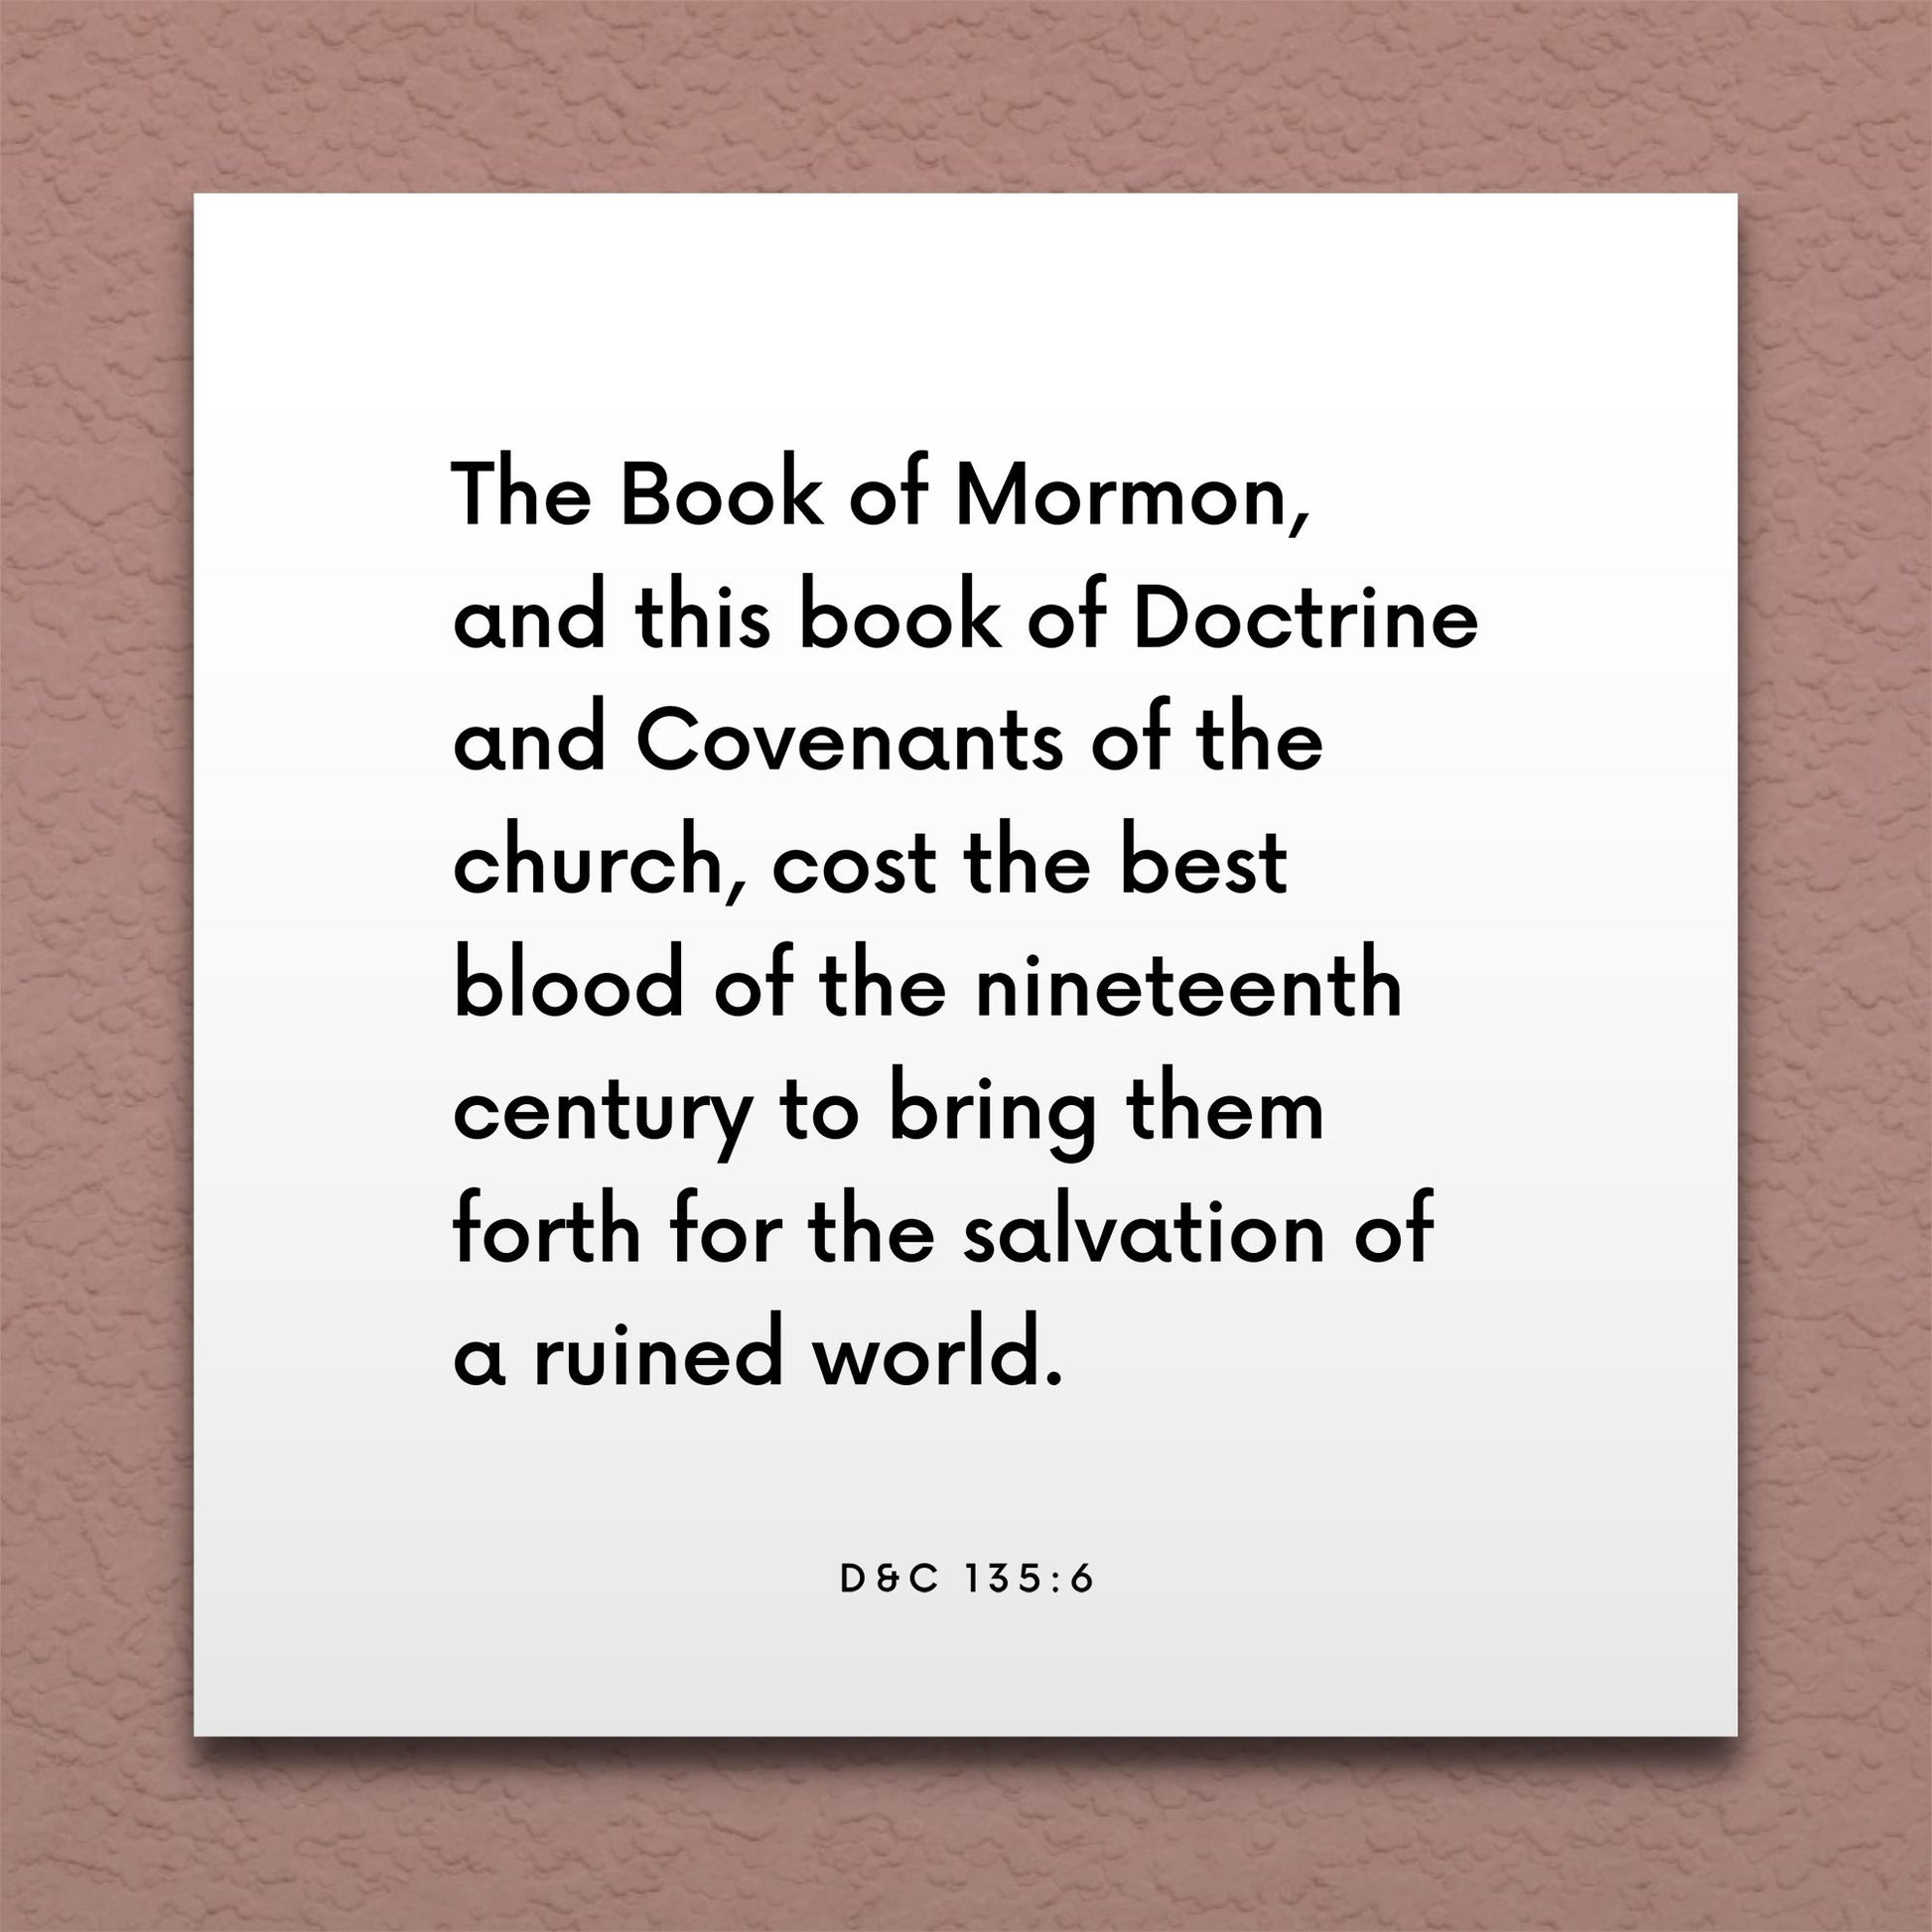 Wall-mounted scripture tile for D&C 135:6 - "The best blood of the nineteenth century"